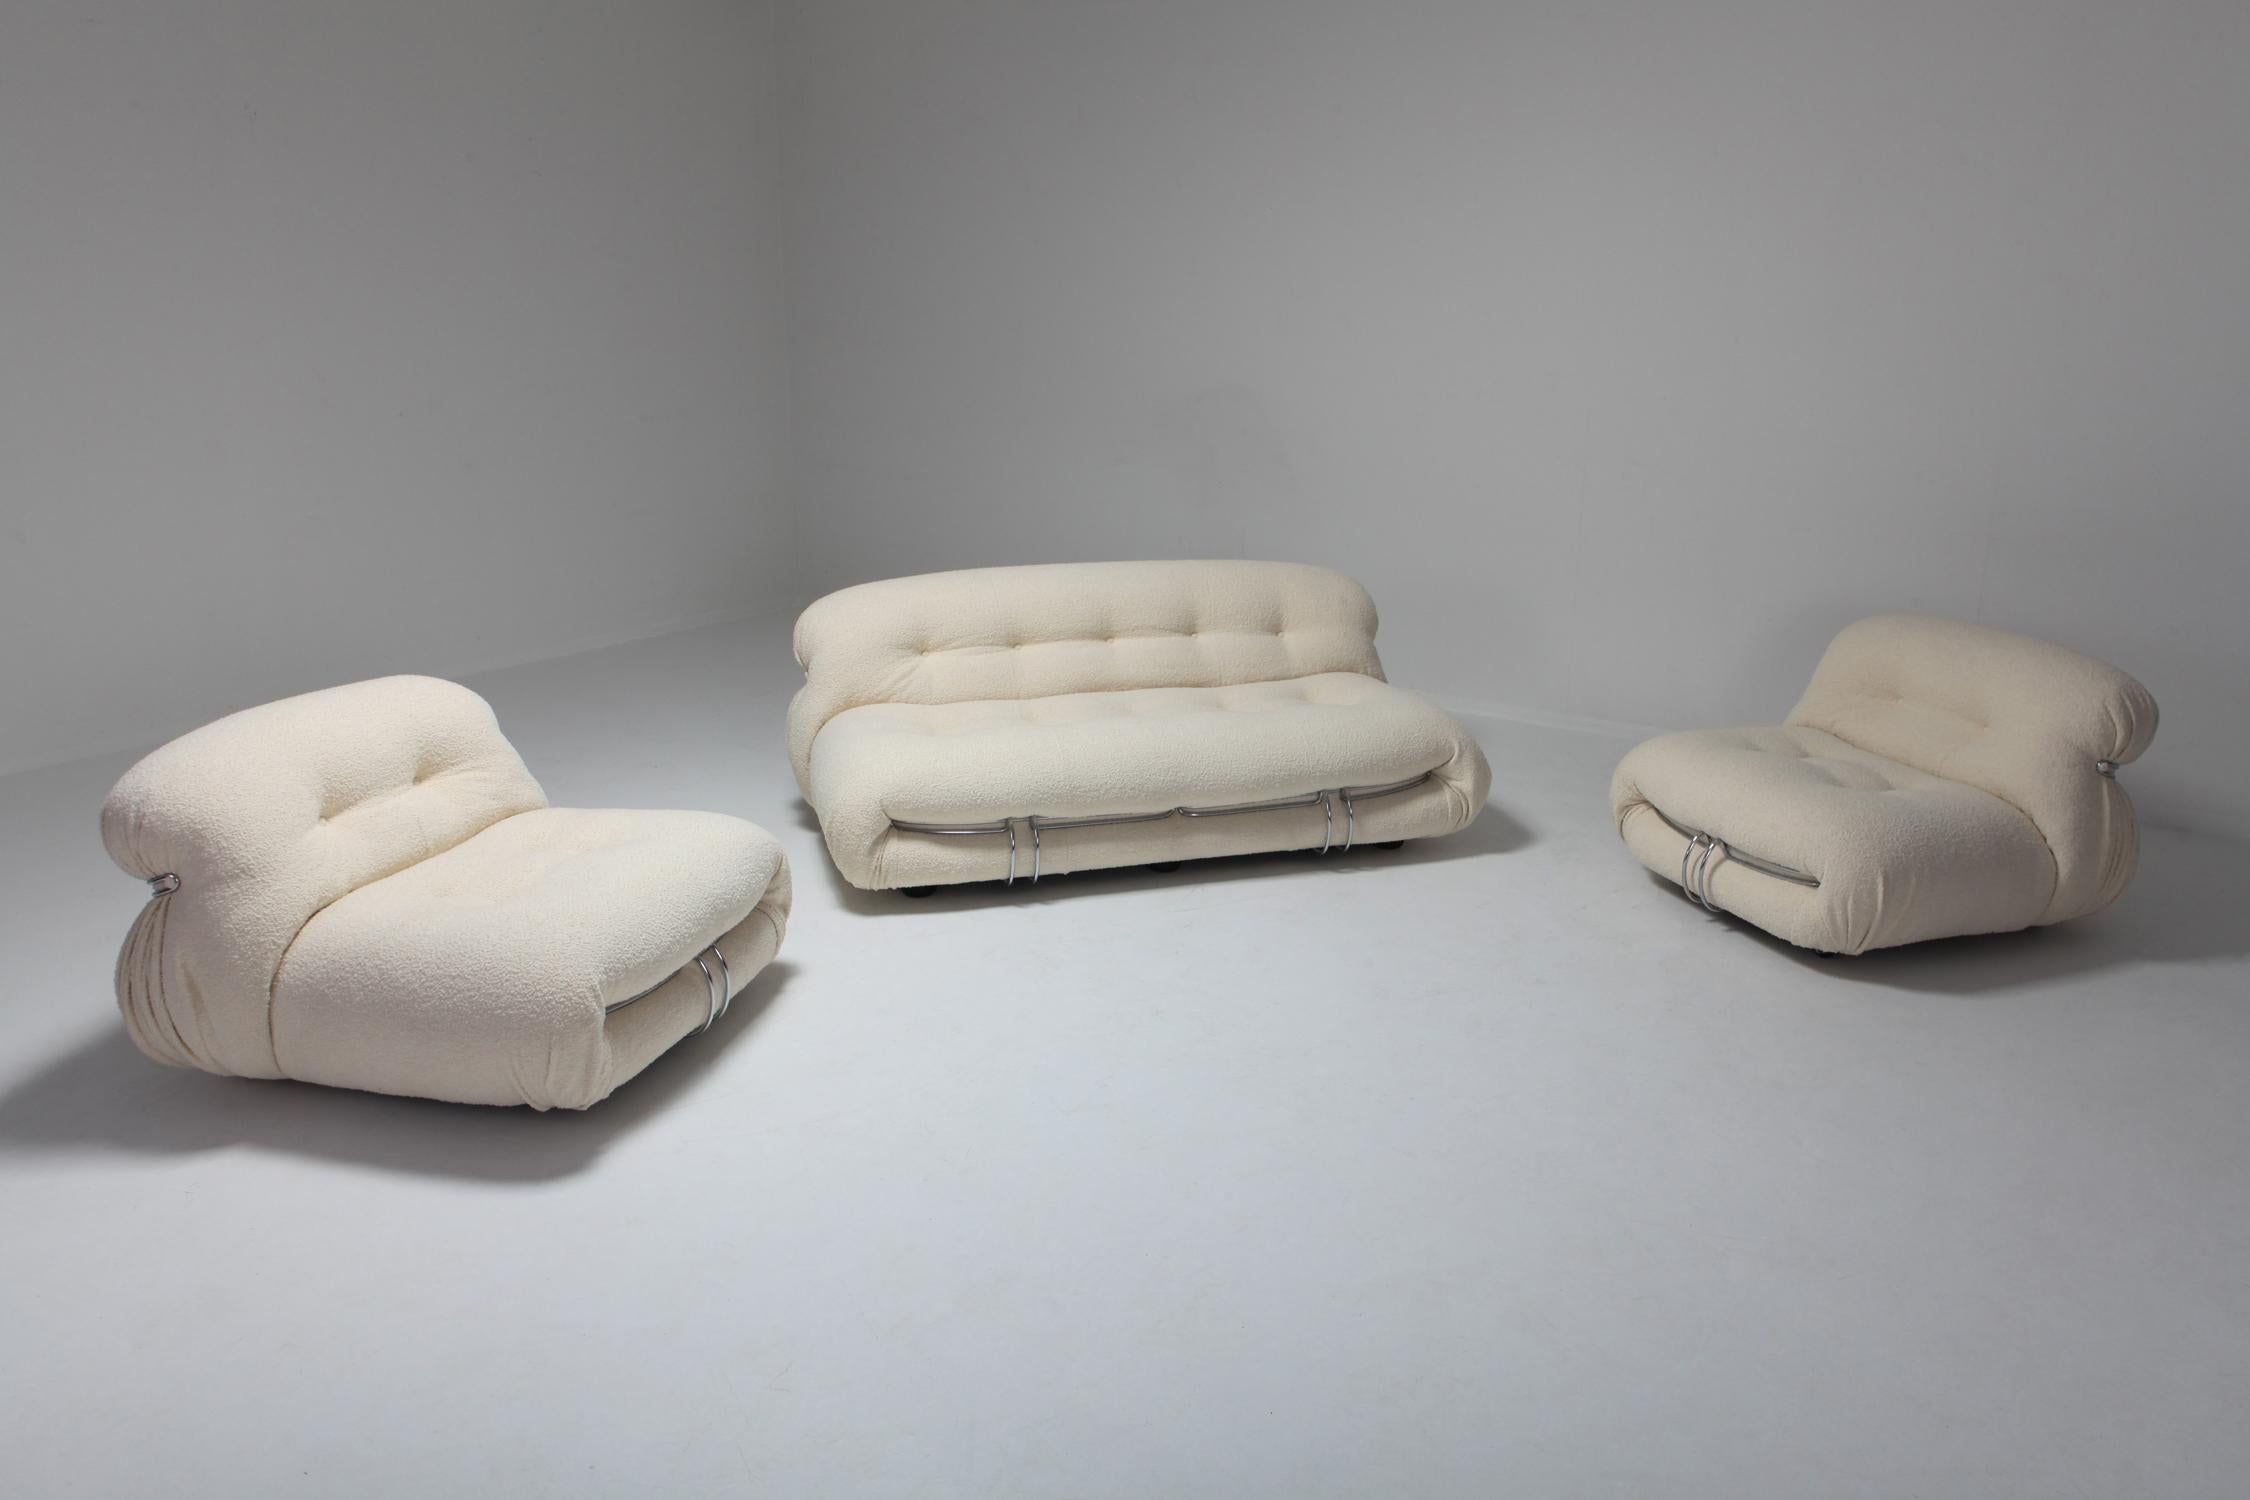 Mid-Century Modern set by Afra and Tobia Scarpa reupholstered in ivory Lelièvre Parisian bouclé wool.
Manufactured by Cassina in the 1970s, the Soriana collection was meant to express beauty and comfort by using a whole bundle of fabric held by a